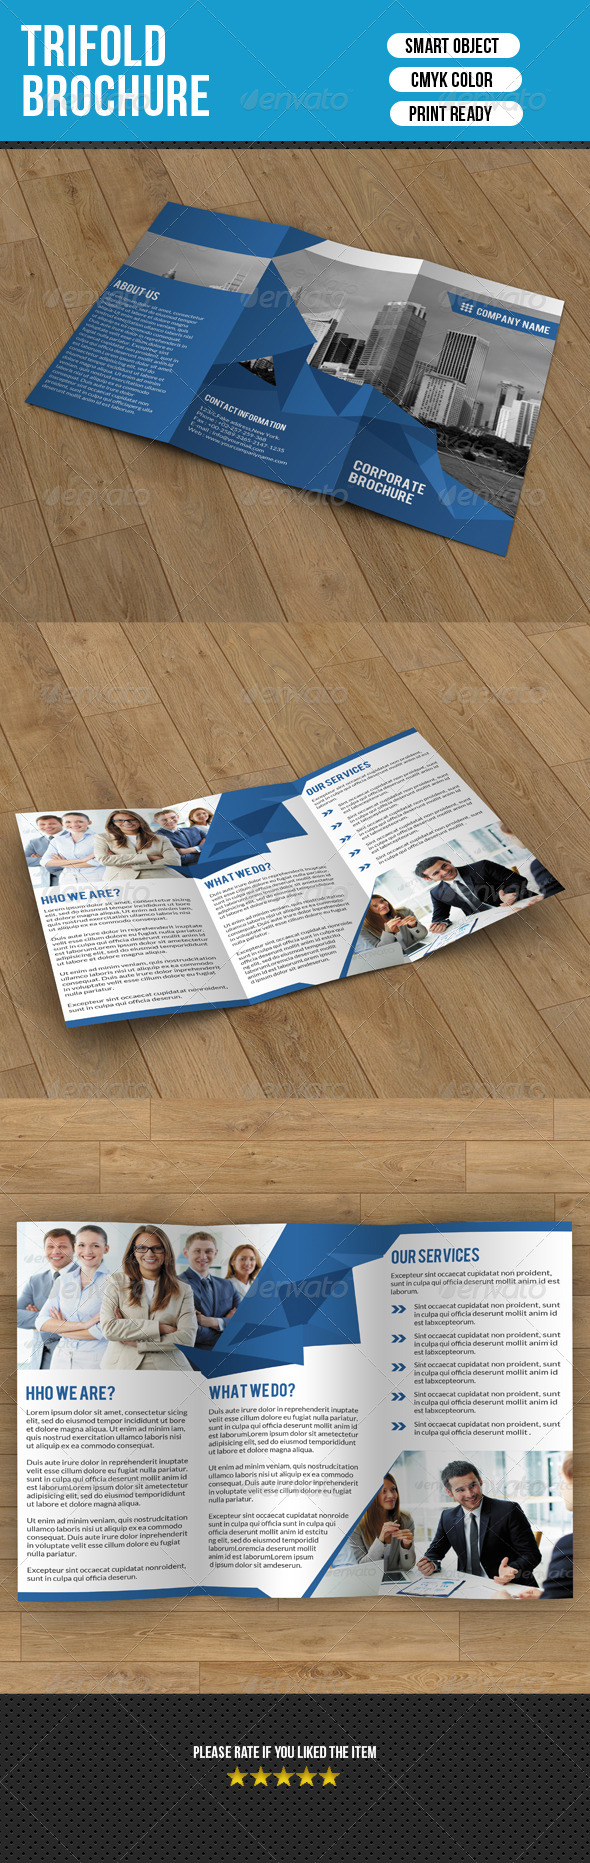 GraphicRiver Trifold Brochure-Business 7684853